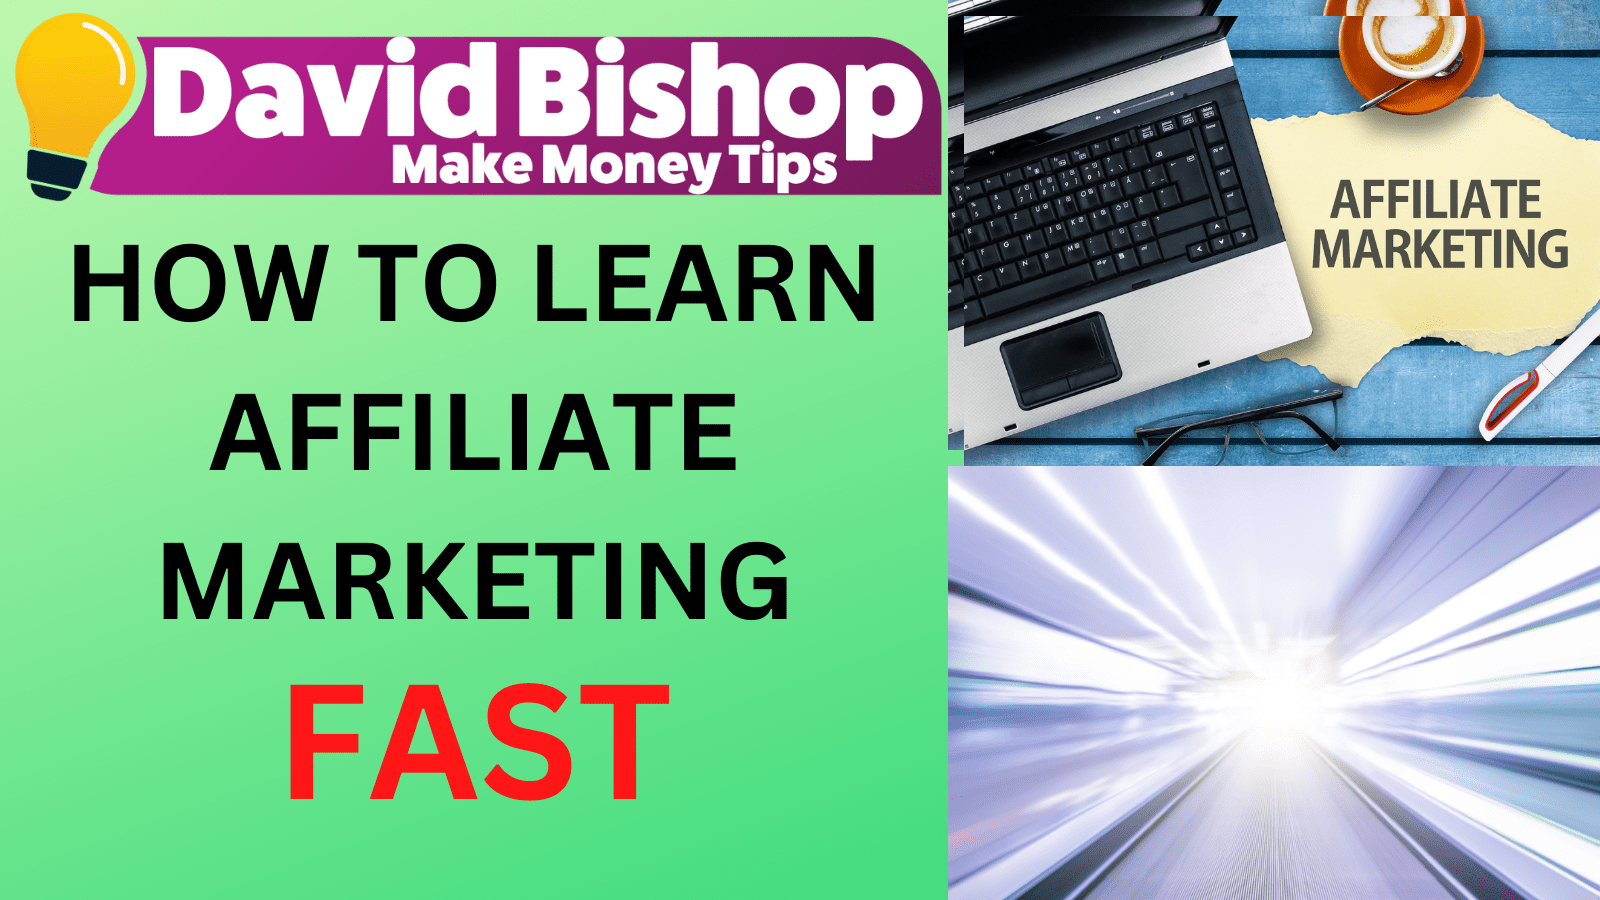 HOW TO LEARN AFFILIATE MARKETING FAST